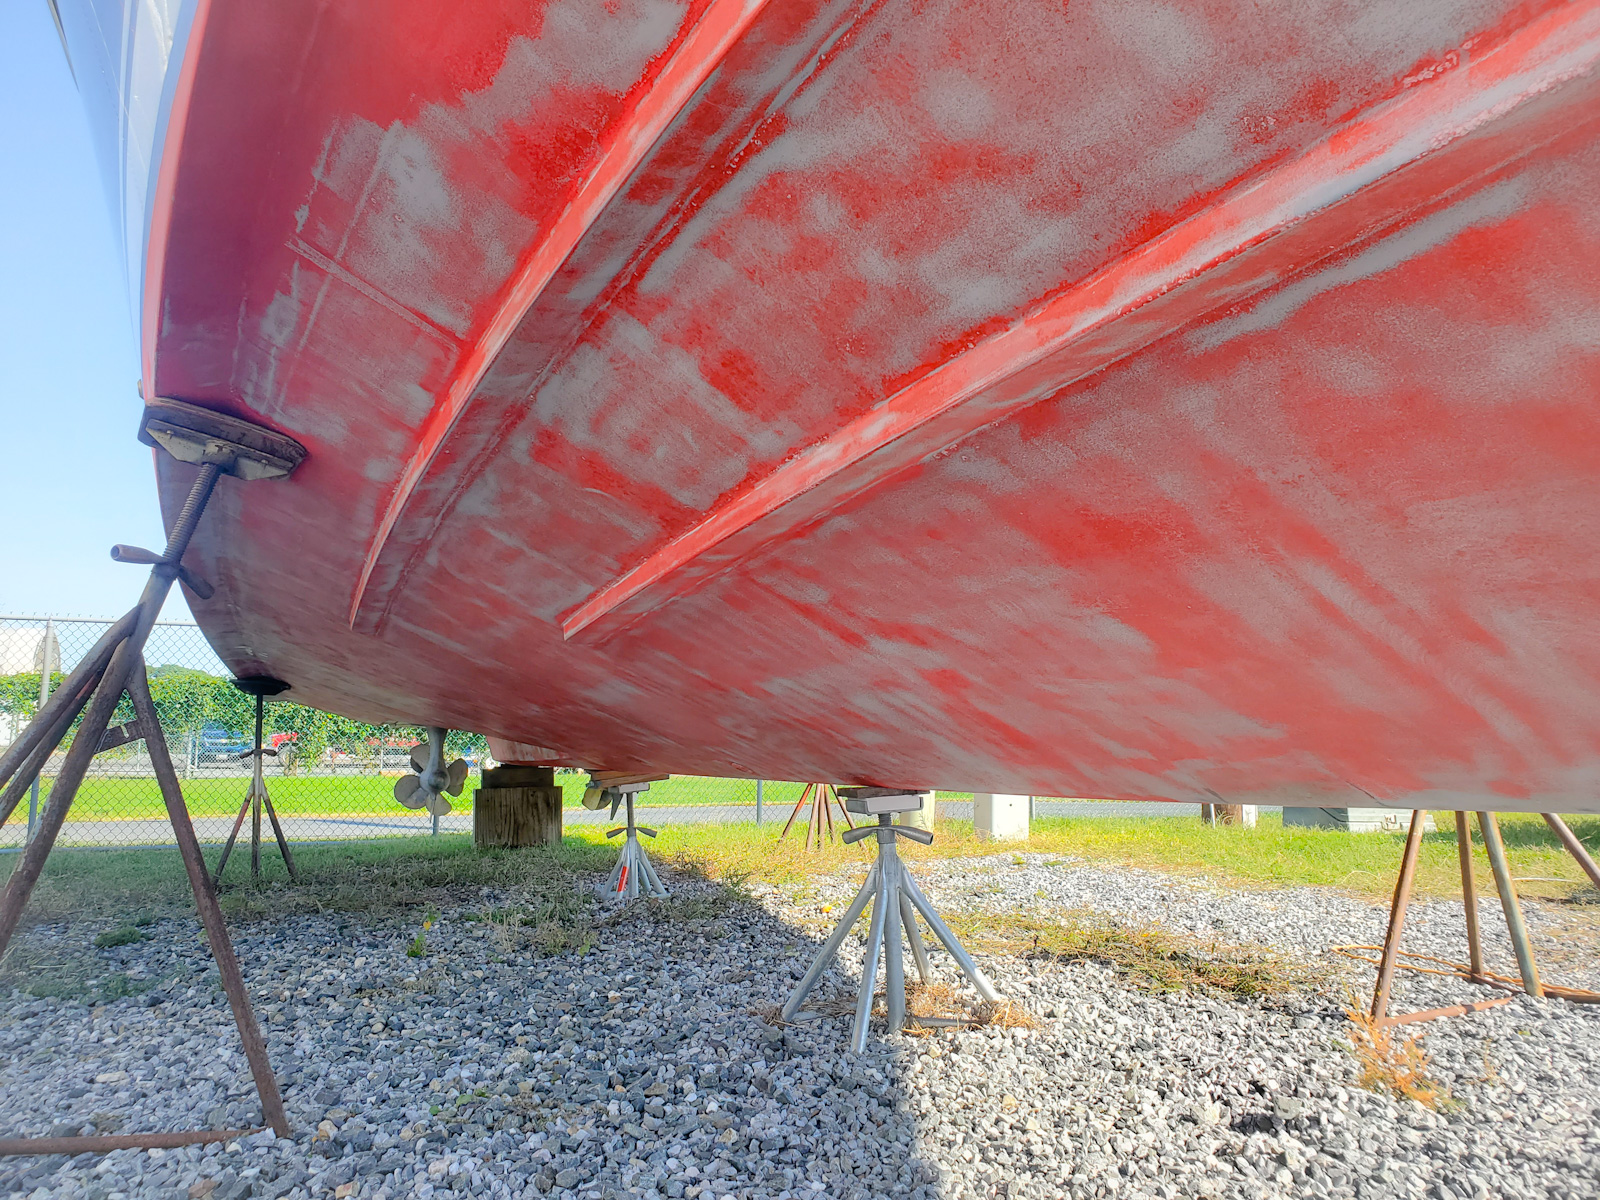 Ablative Boat Bottom Painting